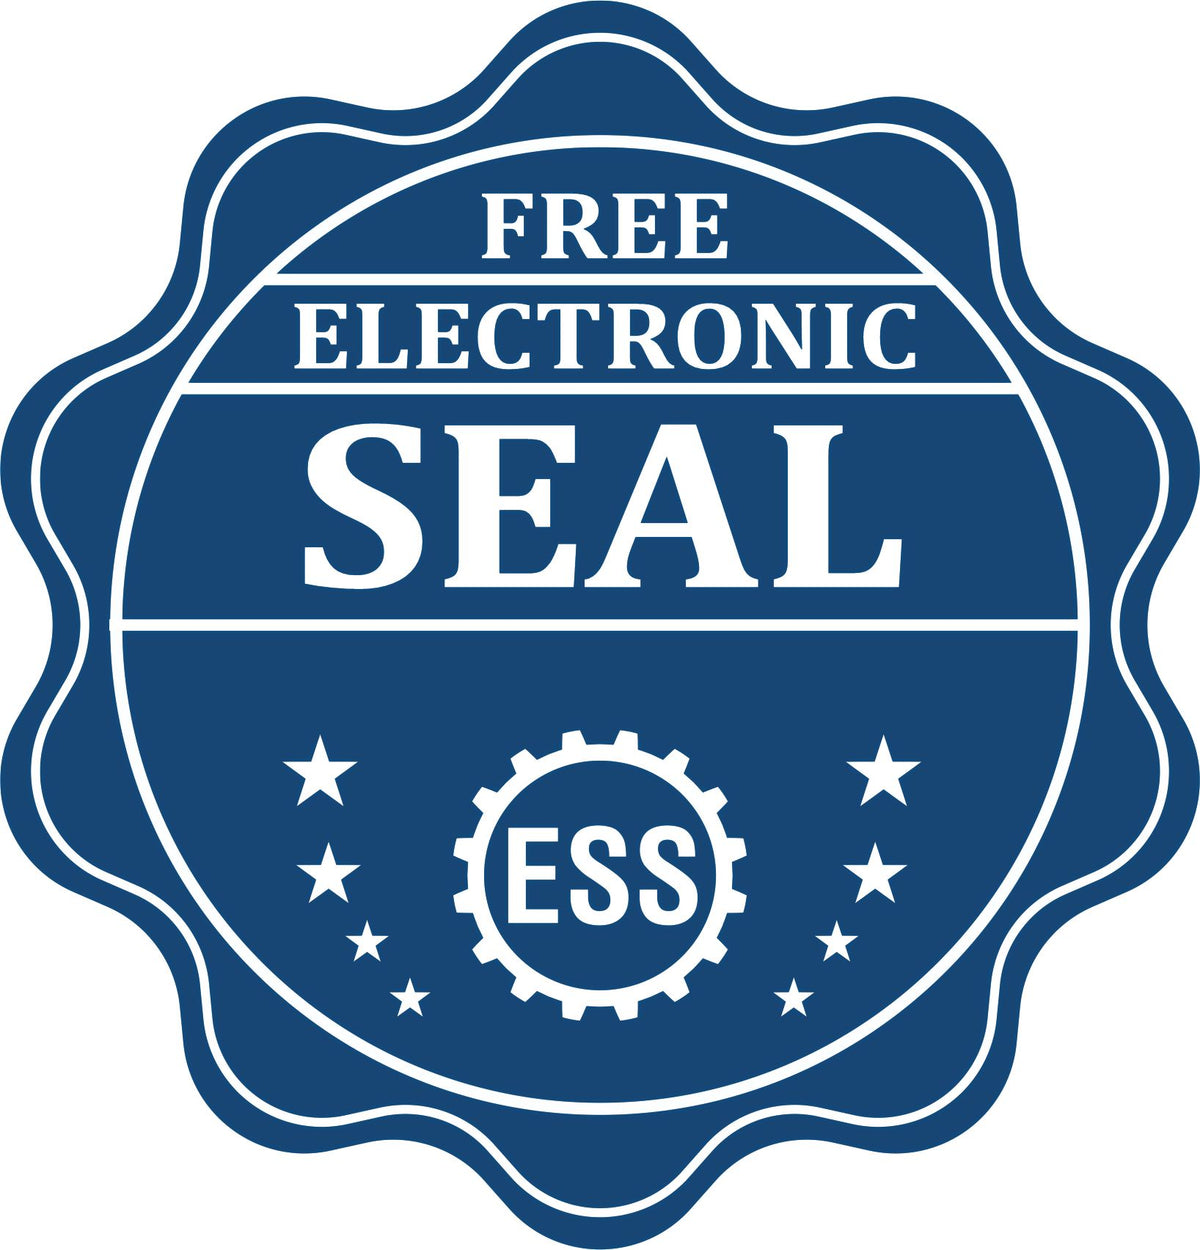 A badge showing a free electronic seal for the Montana Engineer Desk Seal with stars and the ESS gear on the emblem.